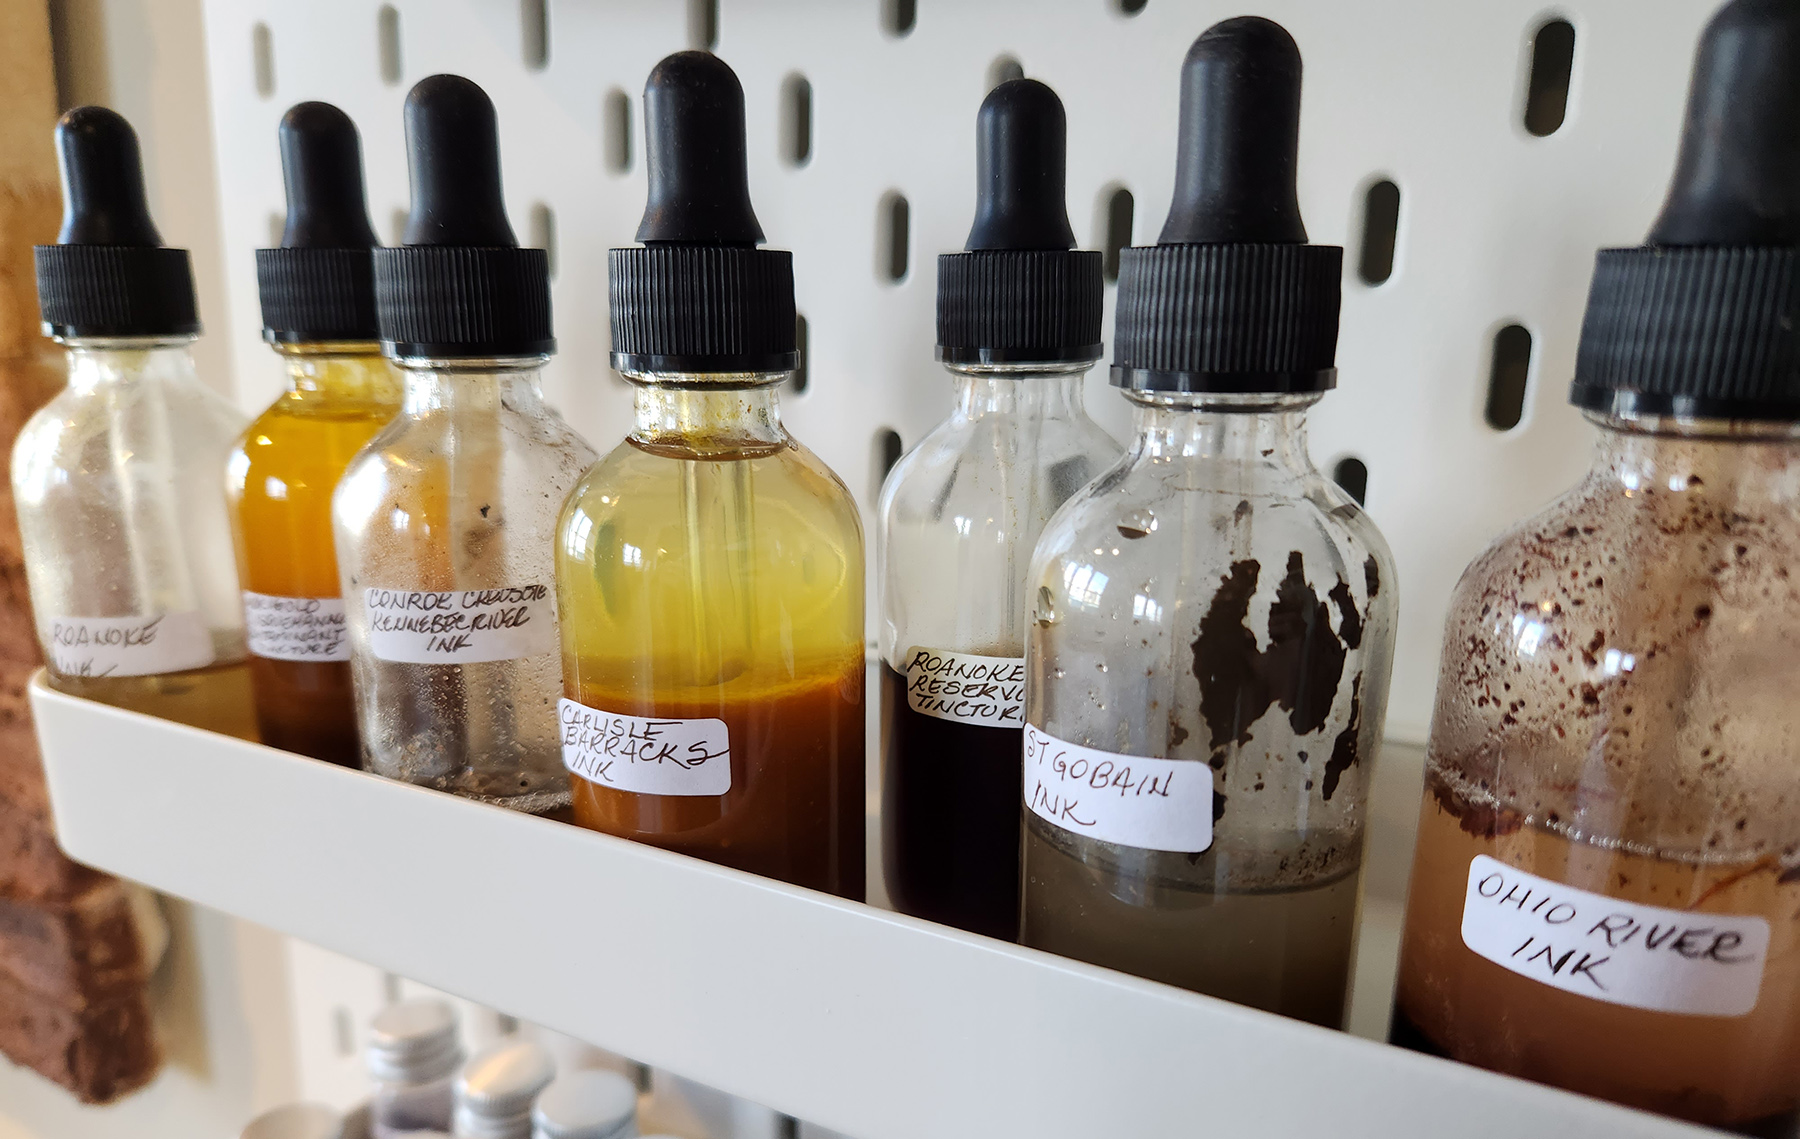 Vials containing PFAS contaminated materials on display in Radical Gardening. Vial labels include "Ohio River ink" and "Roanoke Reservoir Tincture"